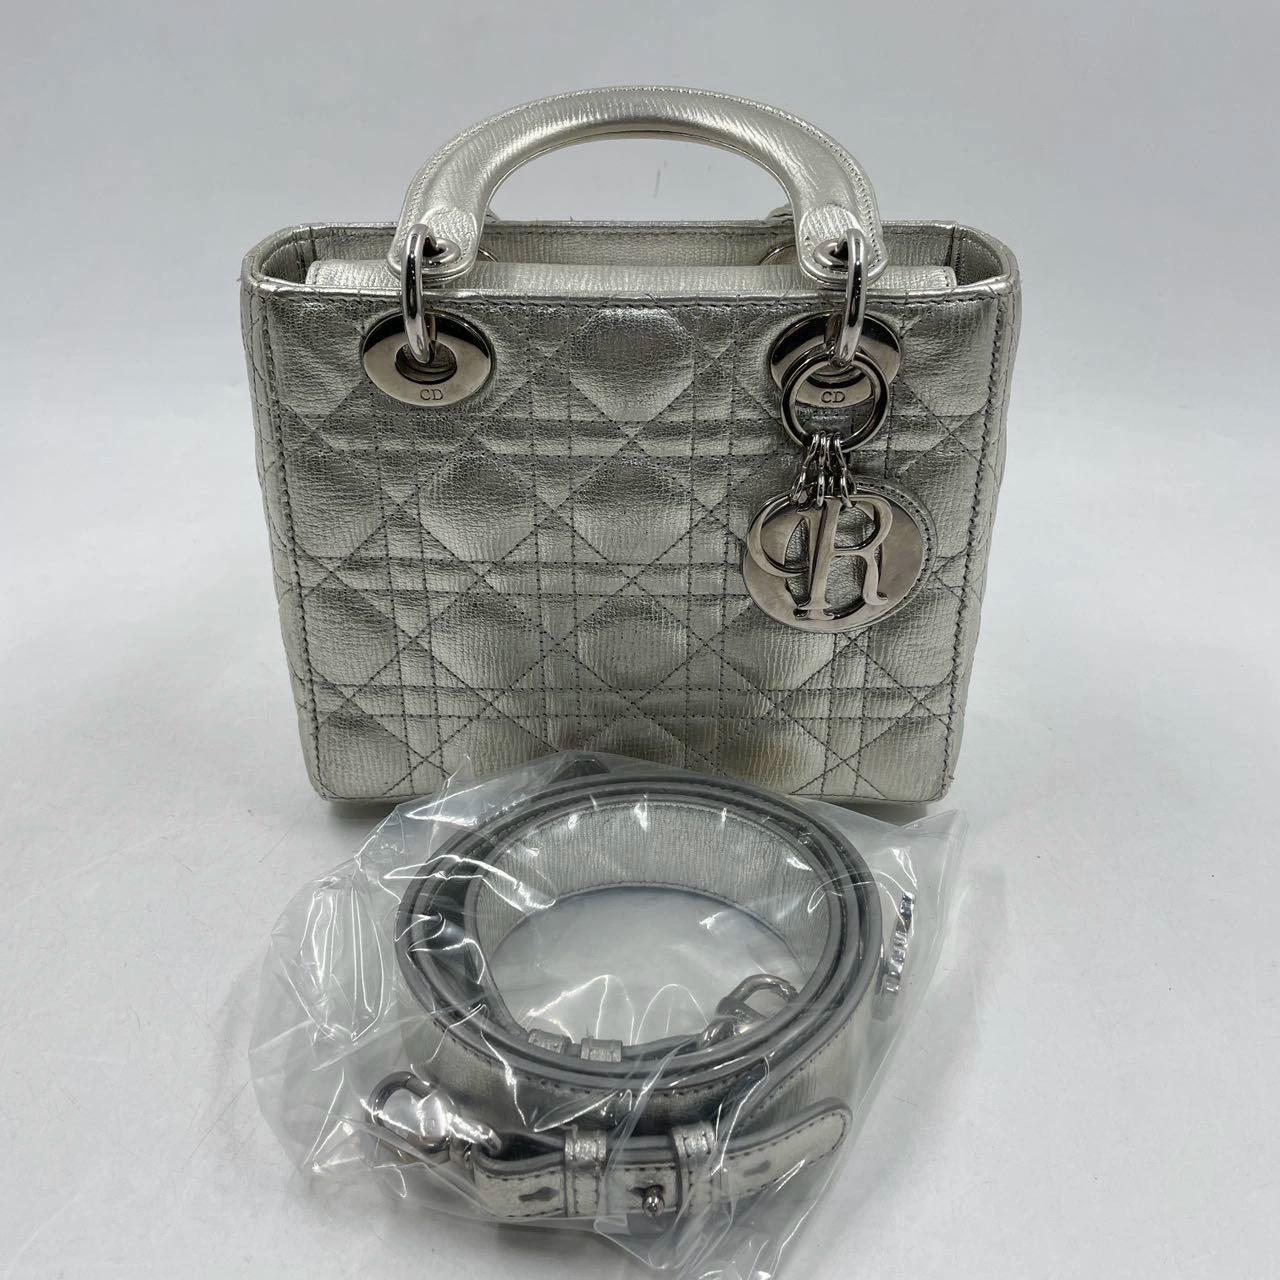 Introducing the Lady Dior ABCdior Small Silver Cannage Lambskin Handbag. Its ABCdior my lady dior design, space silver color, and studded strap make it the epitome of elegance. Plus, its cool color and most popular size make it a must-have accessory